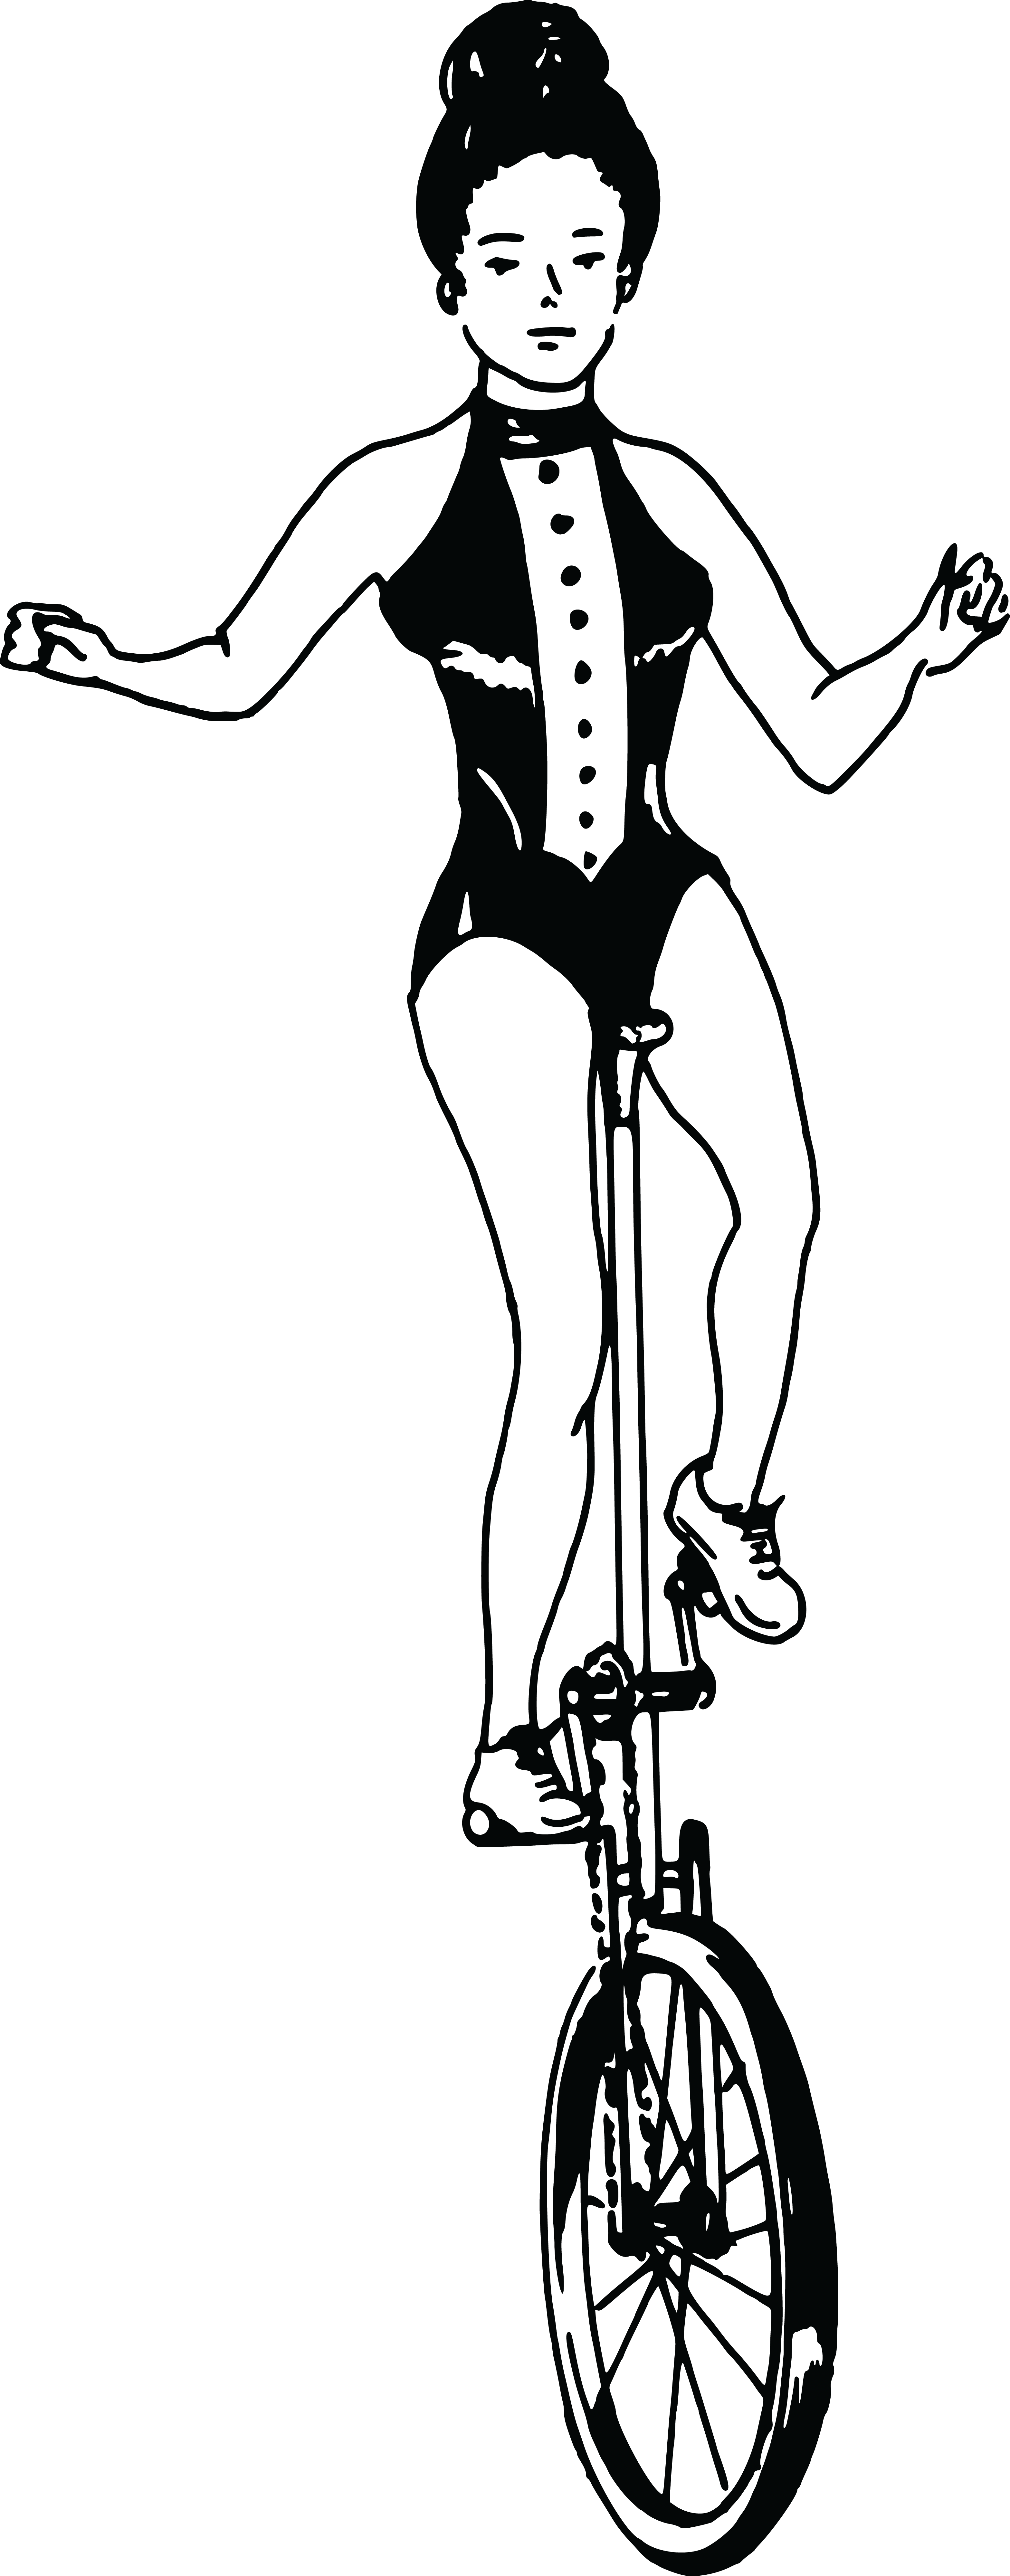 A Silhouette Of A Woman On A Scooter